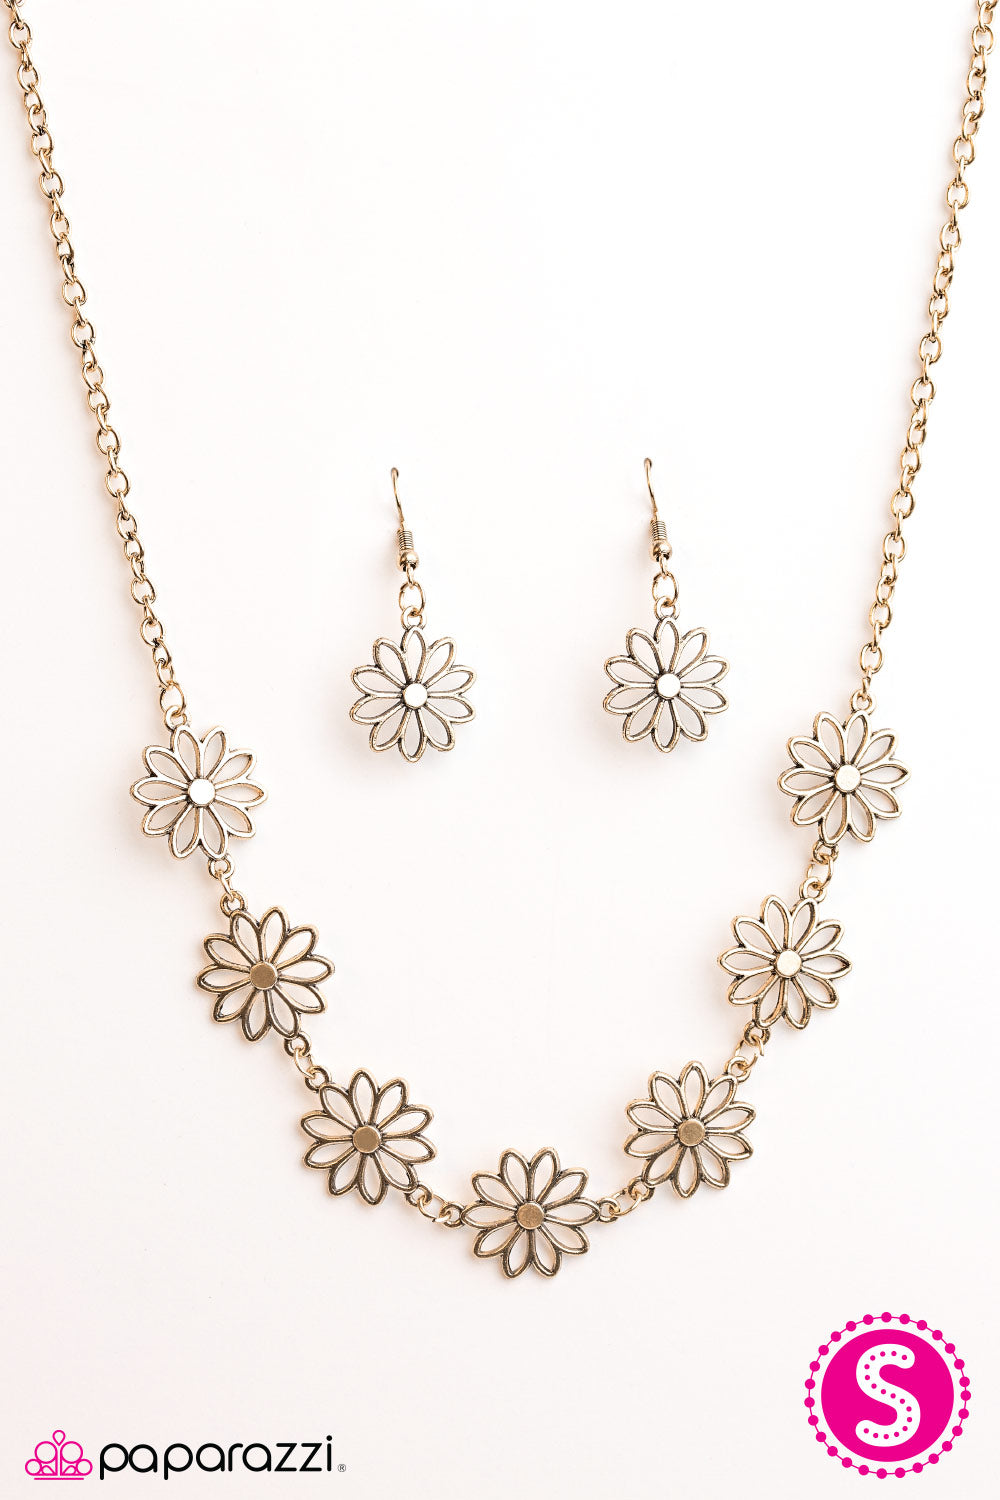 Paparazzi ♥ Crazy For Daisies ♥  Necklace